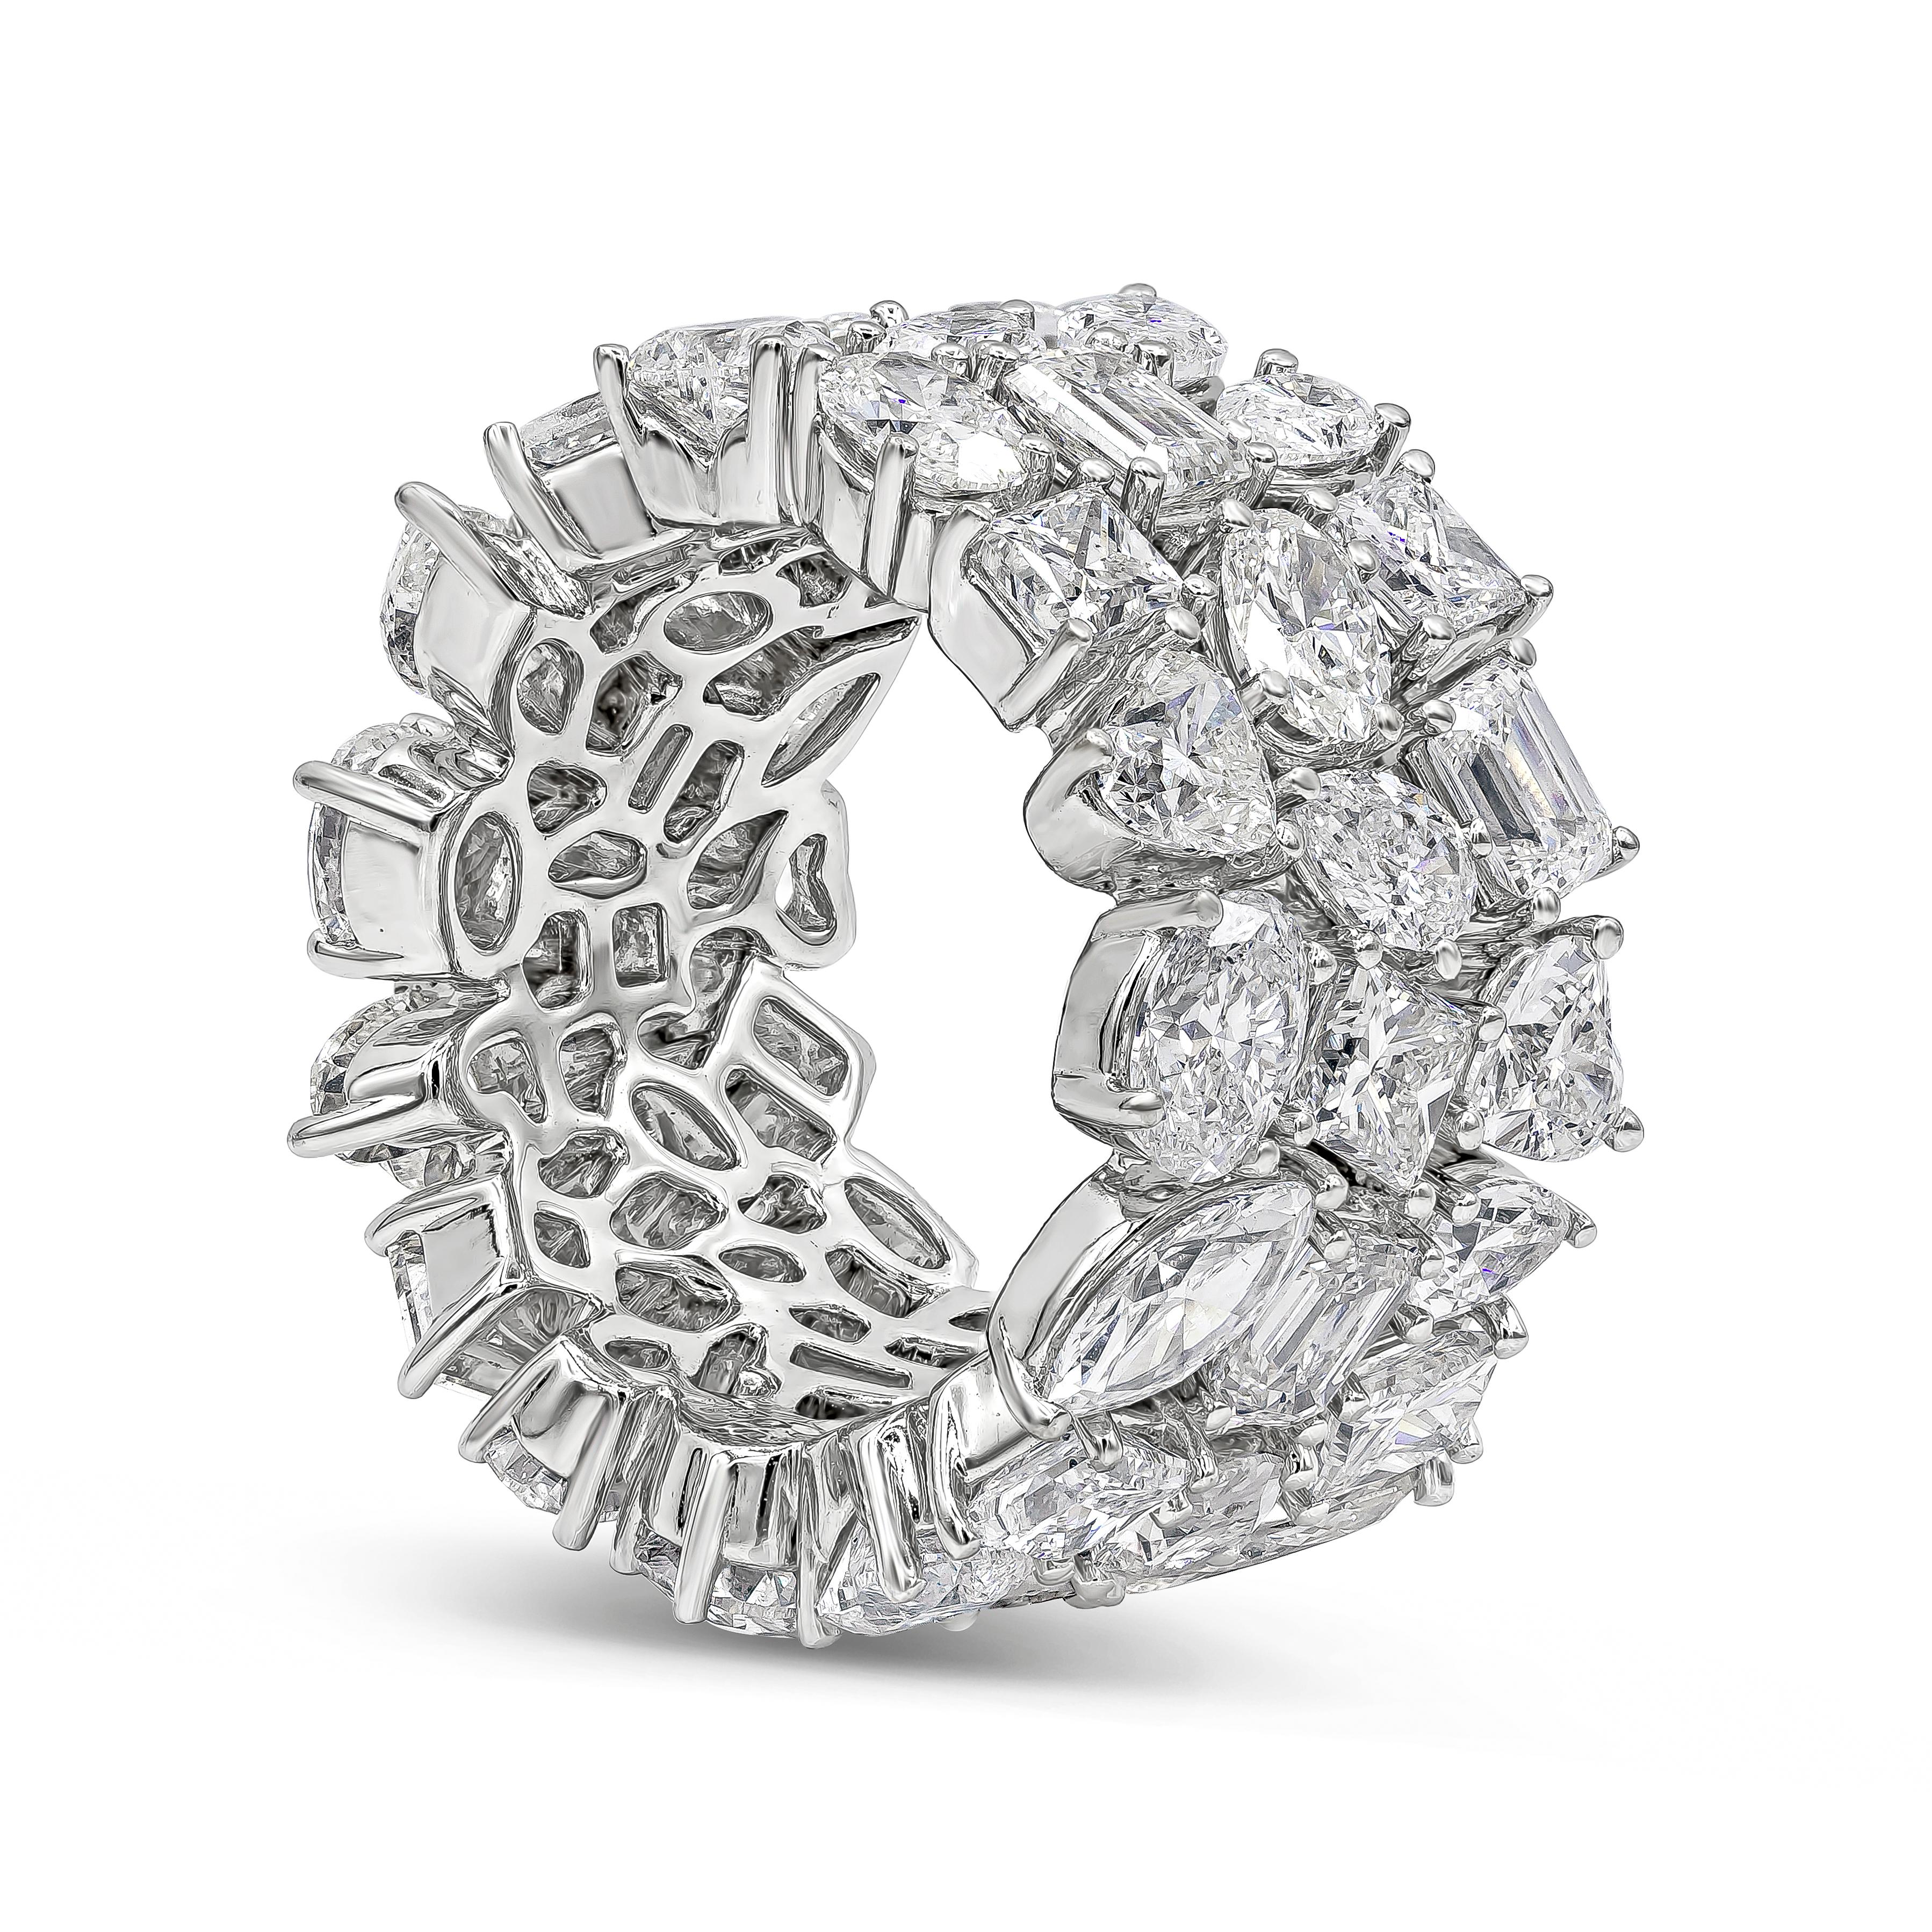 A magnificent and unique piece of jewelry showcasing three-rows of fancy cut diamonds set in an open-work, floating diamond design made in platinum. Diamonds weigh 12.87 carats total. Size 7 US.

Style available in different price ranges. Prices are